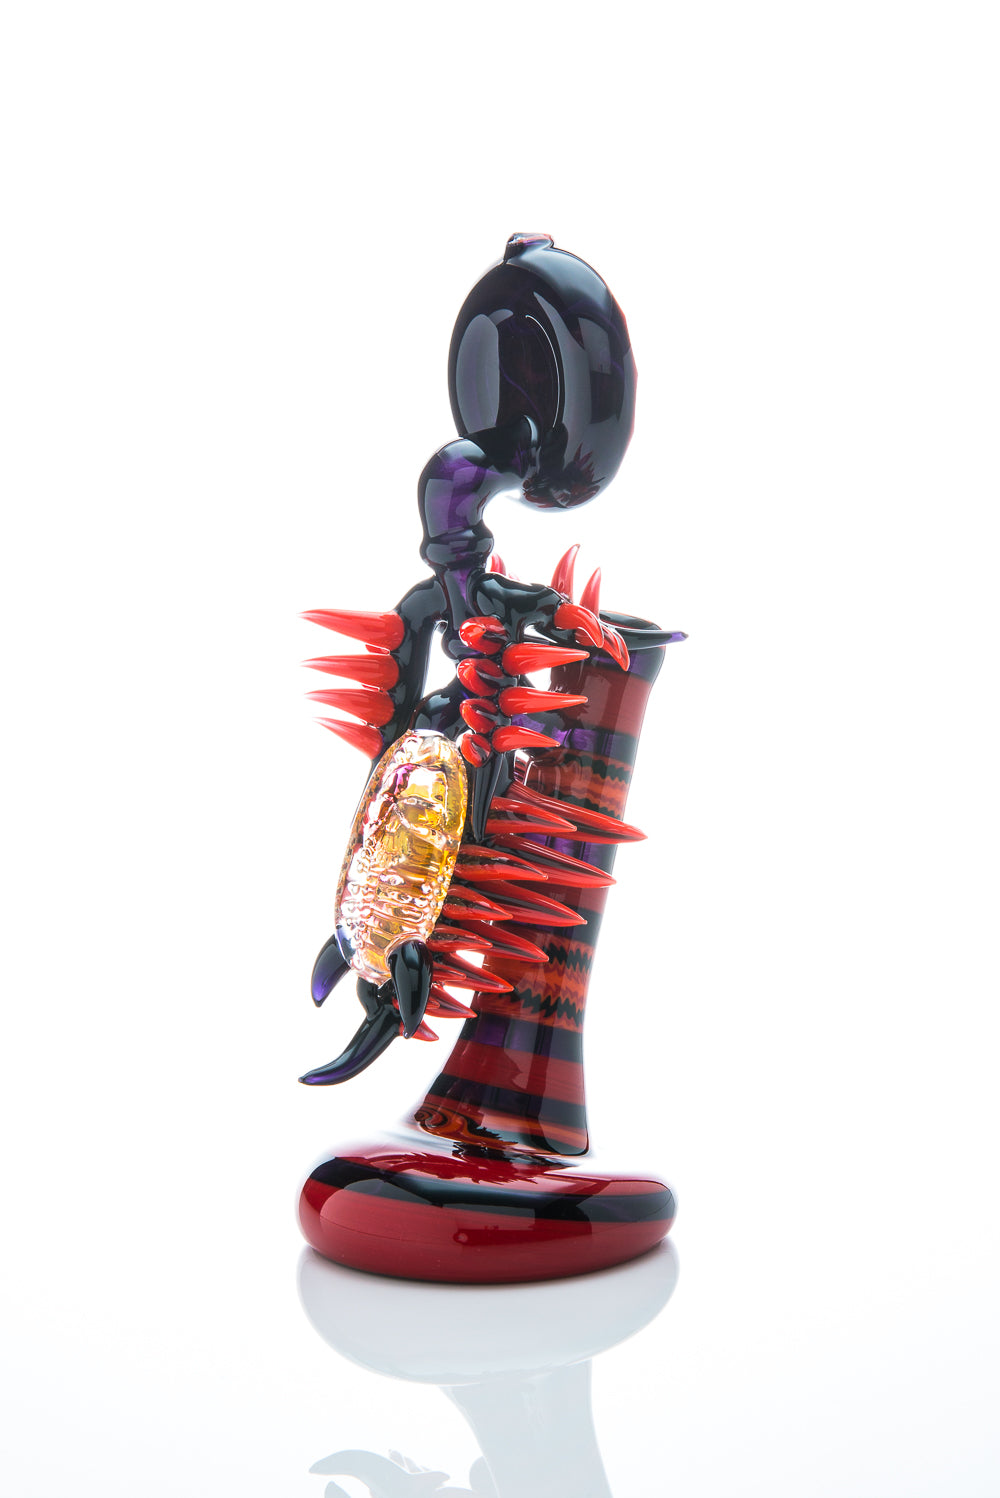 Push Bubbler with Fumed Skull by Cowboy and Banjo